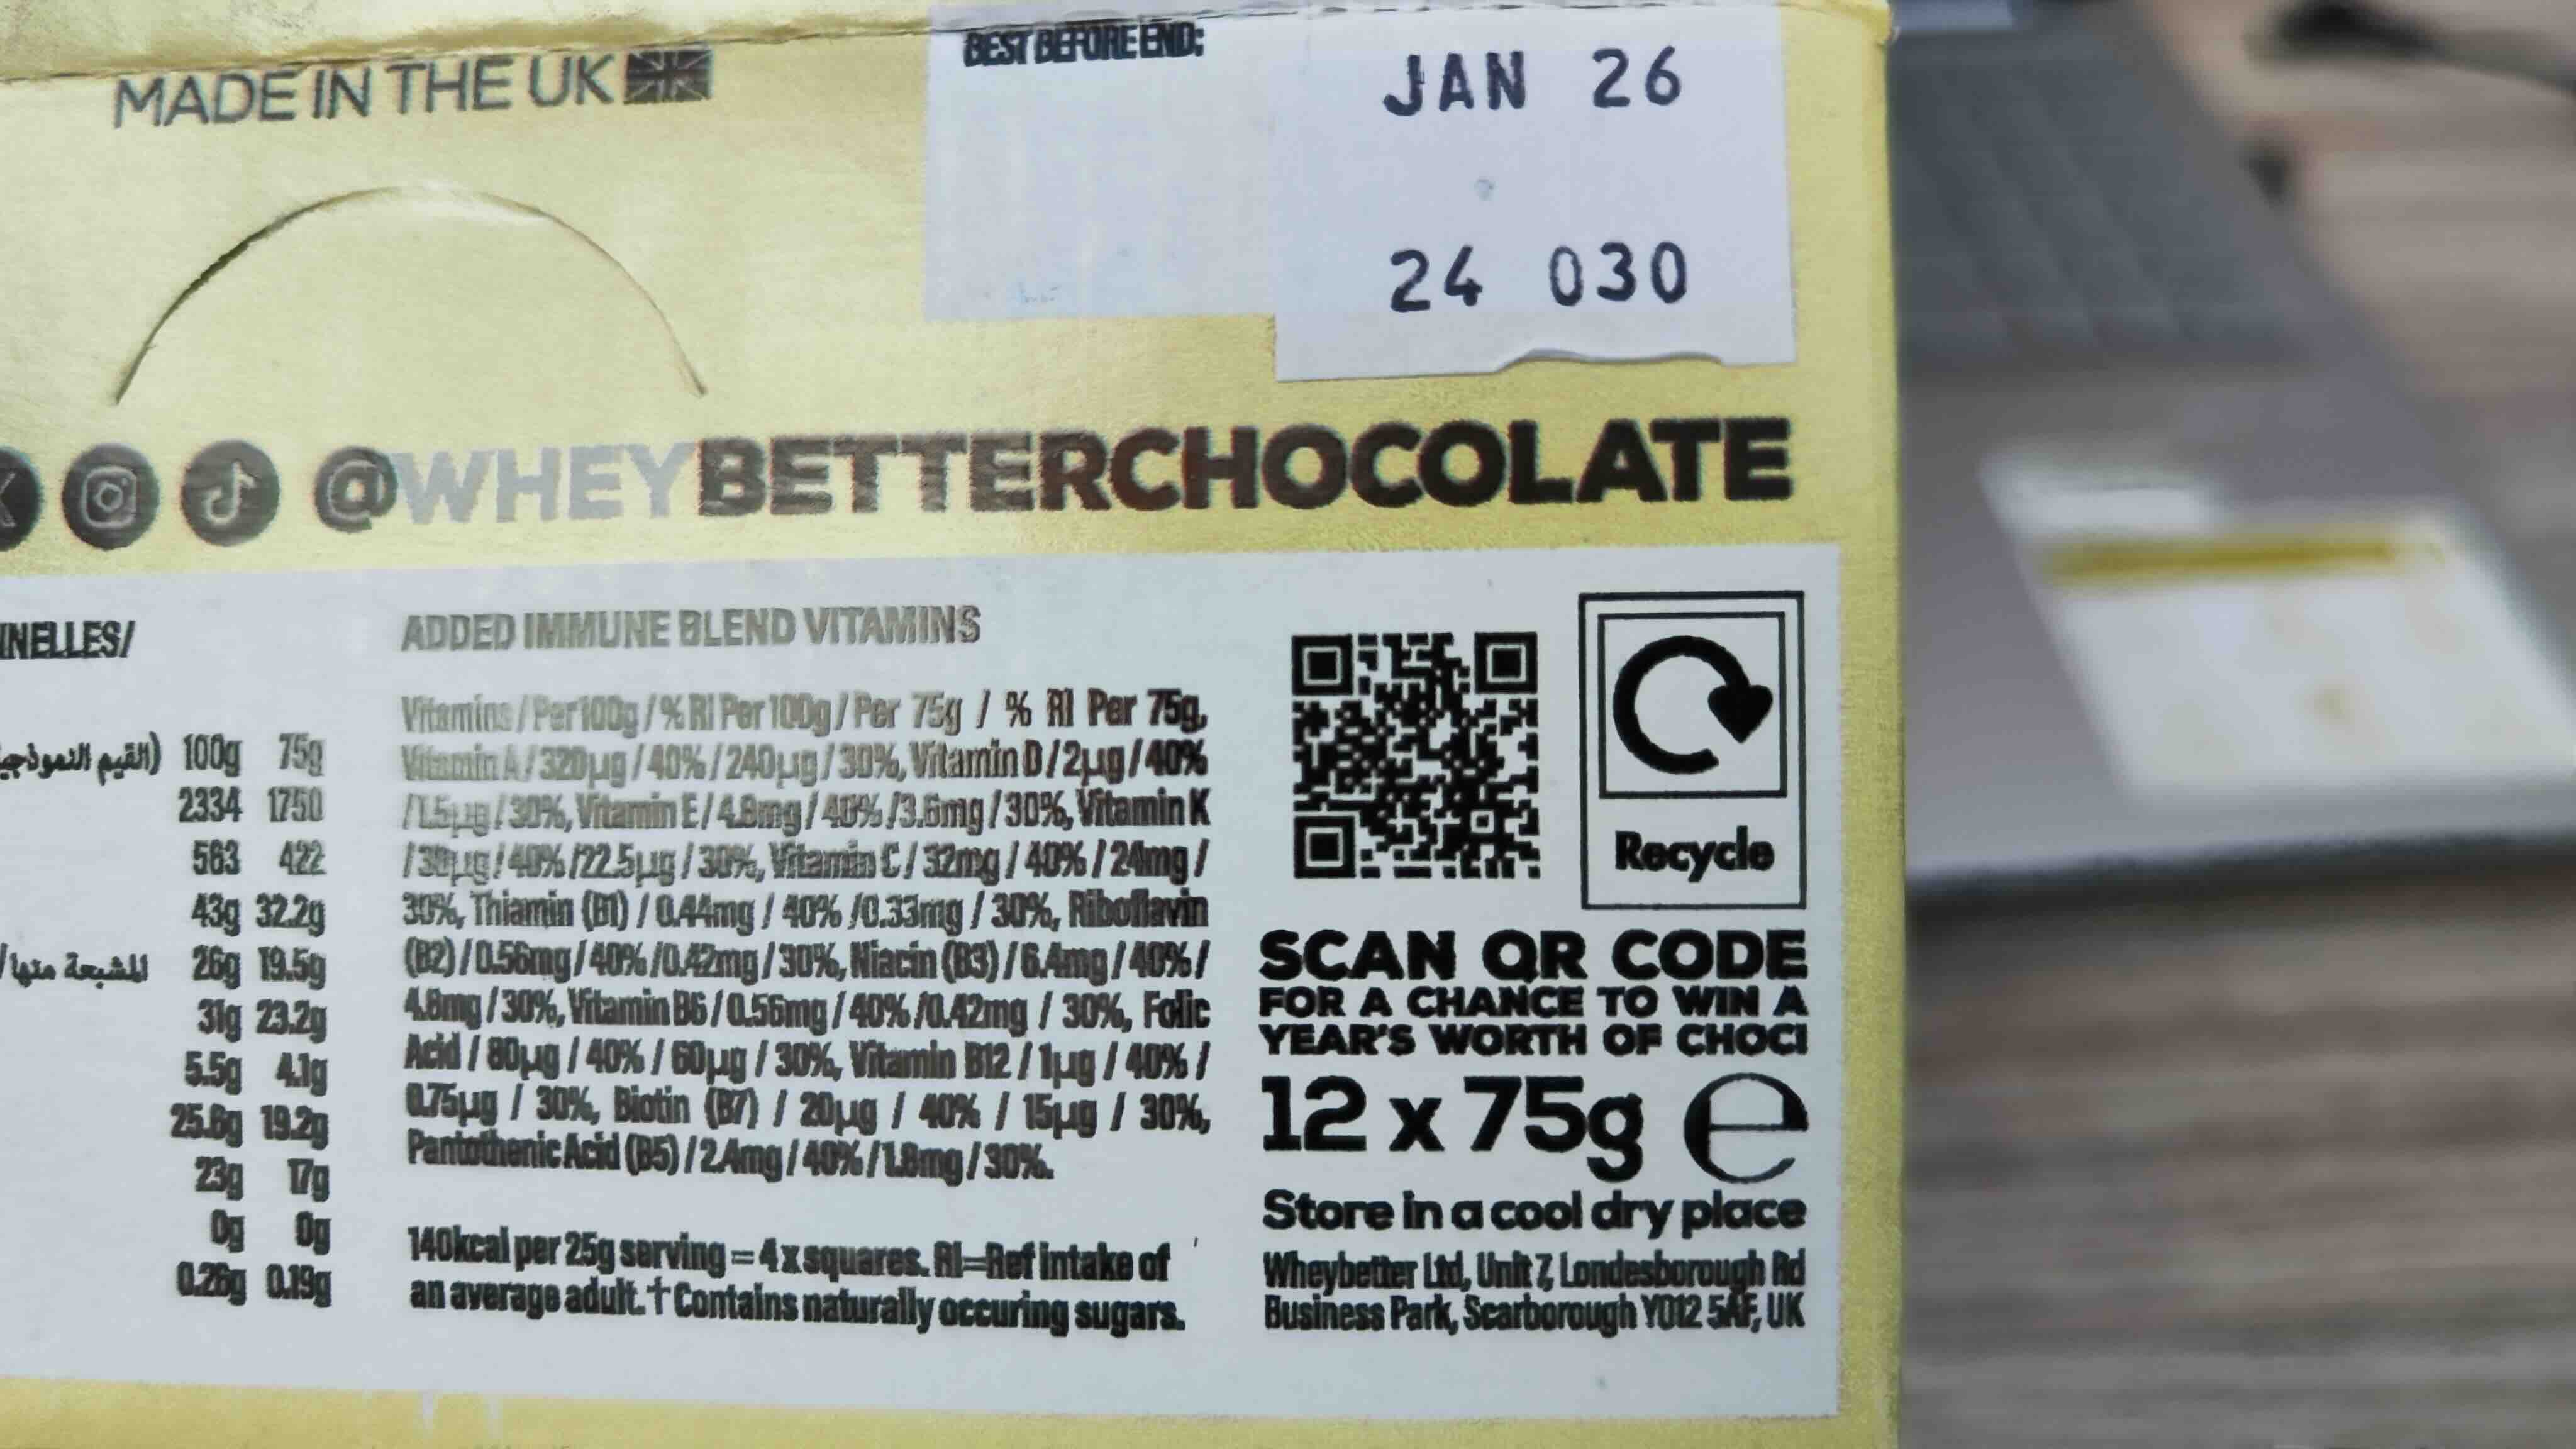 WheyBetter chocolate bar packaging contains new QR codes powered by GS1 